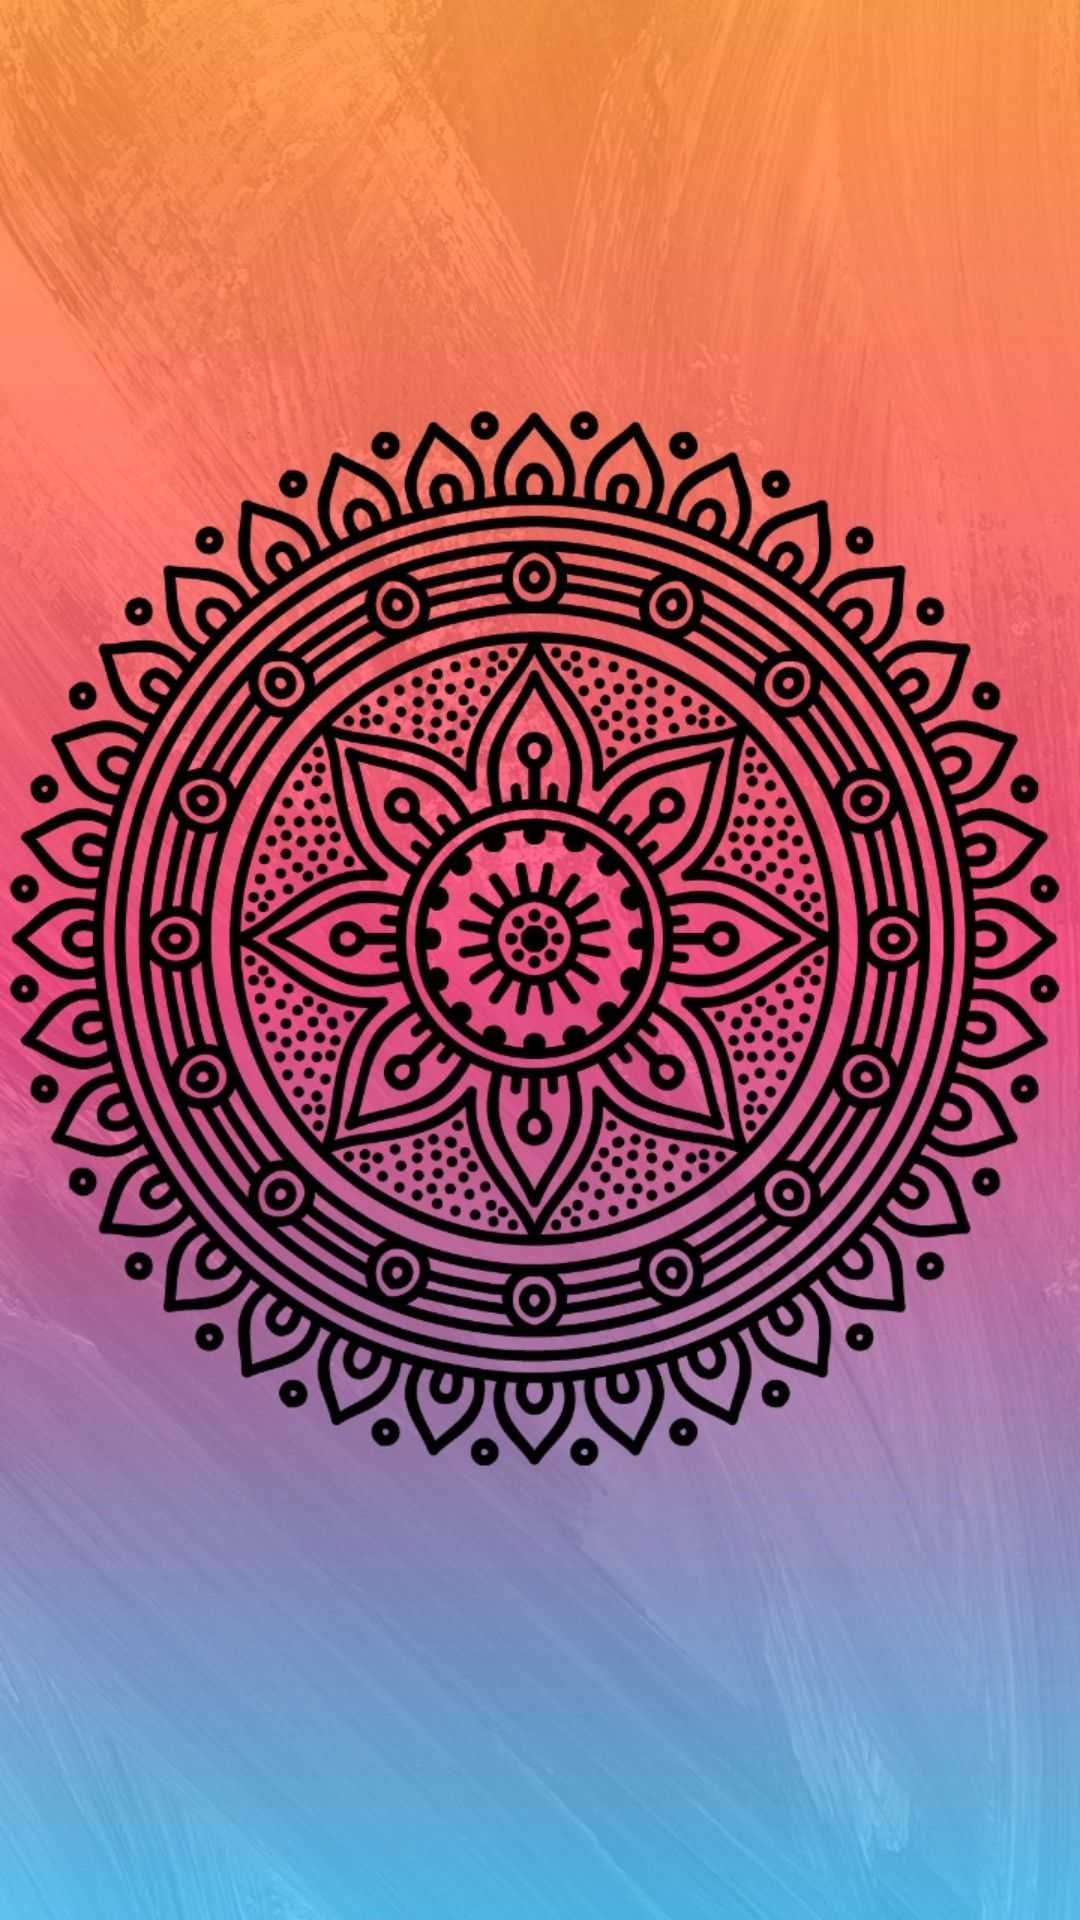 Hippie culture, Artistic wallpaper, Free-spirited expression, Psychedelic vibes, 1080x1920 Full HD Phone